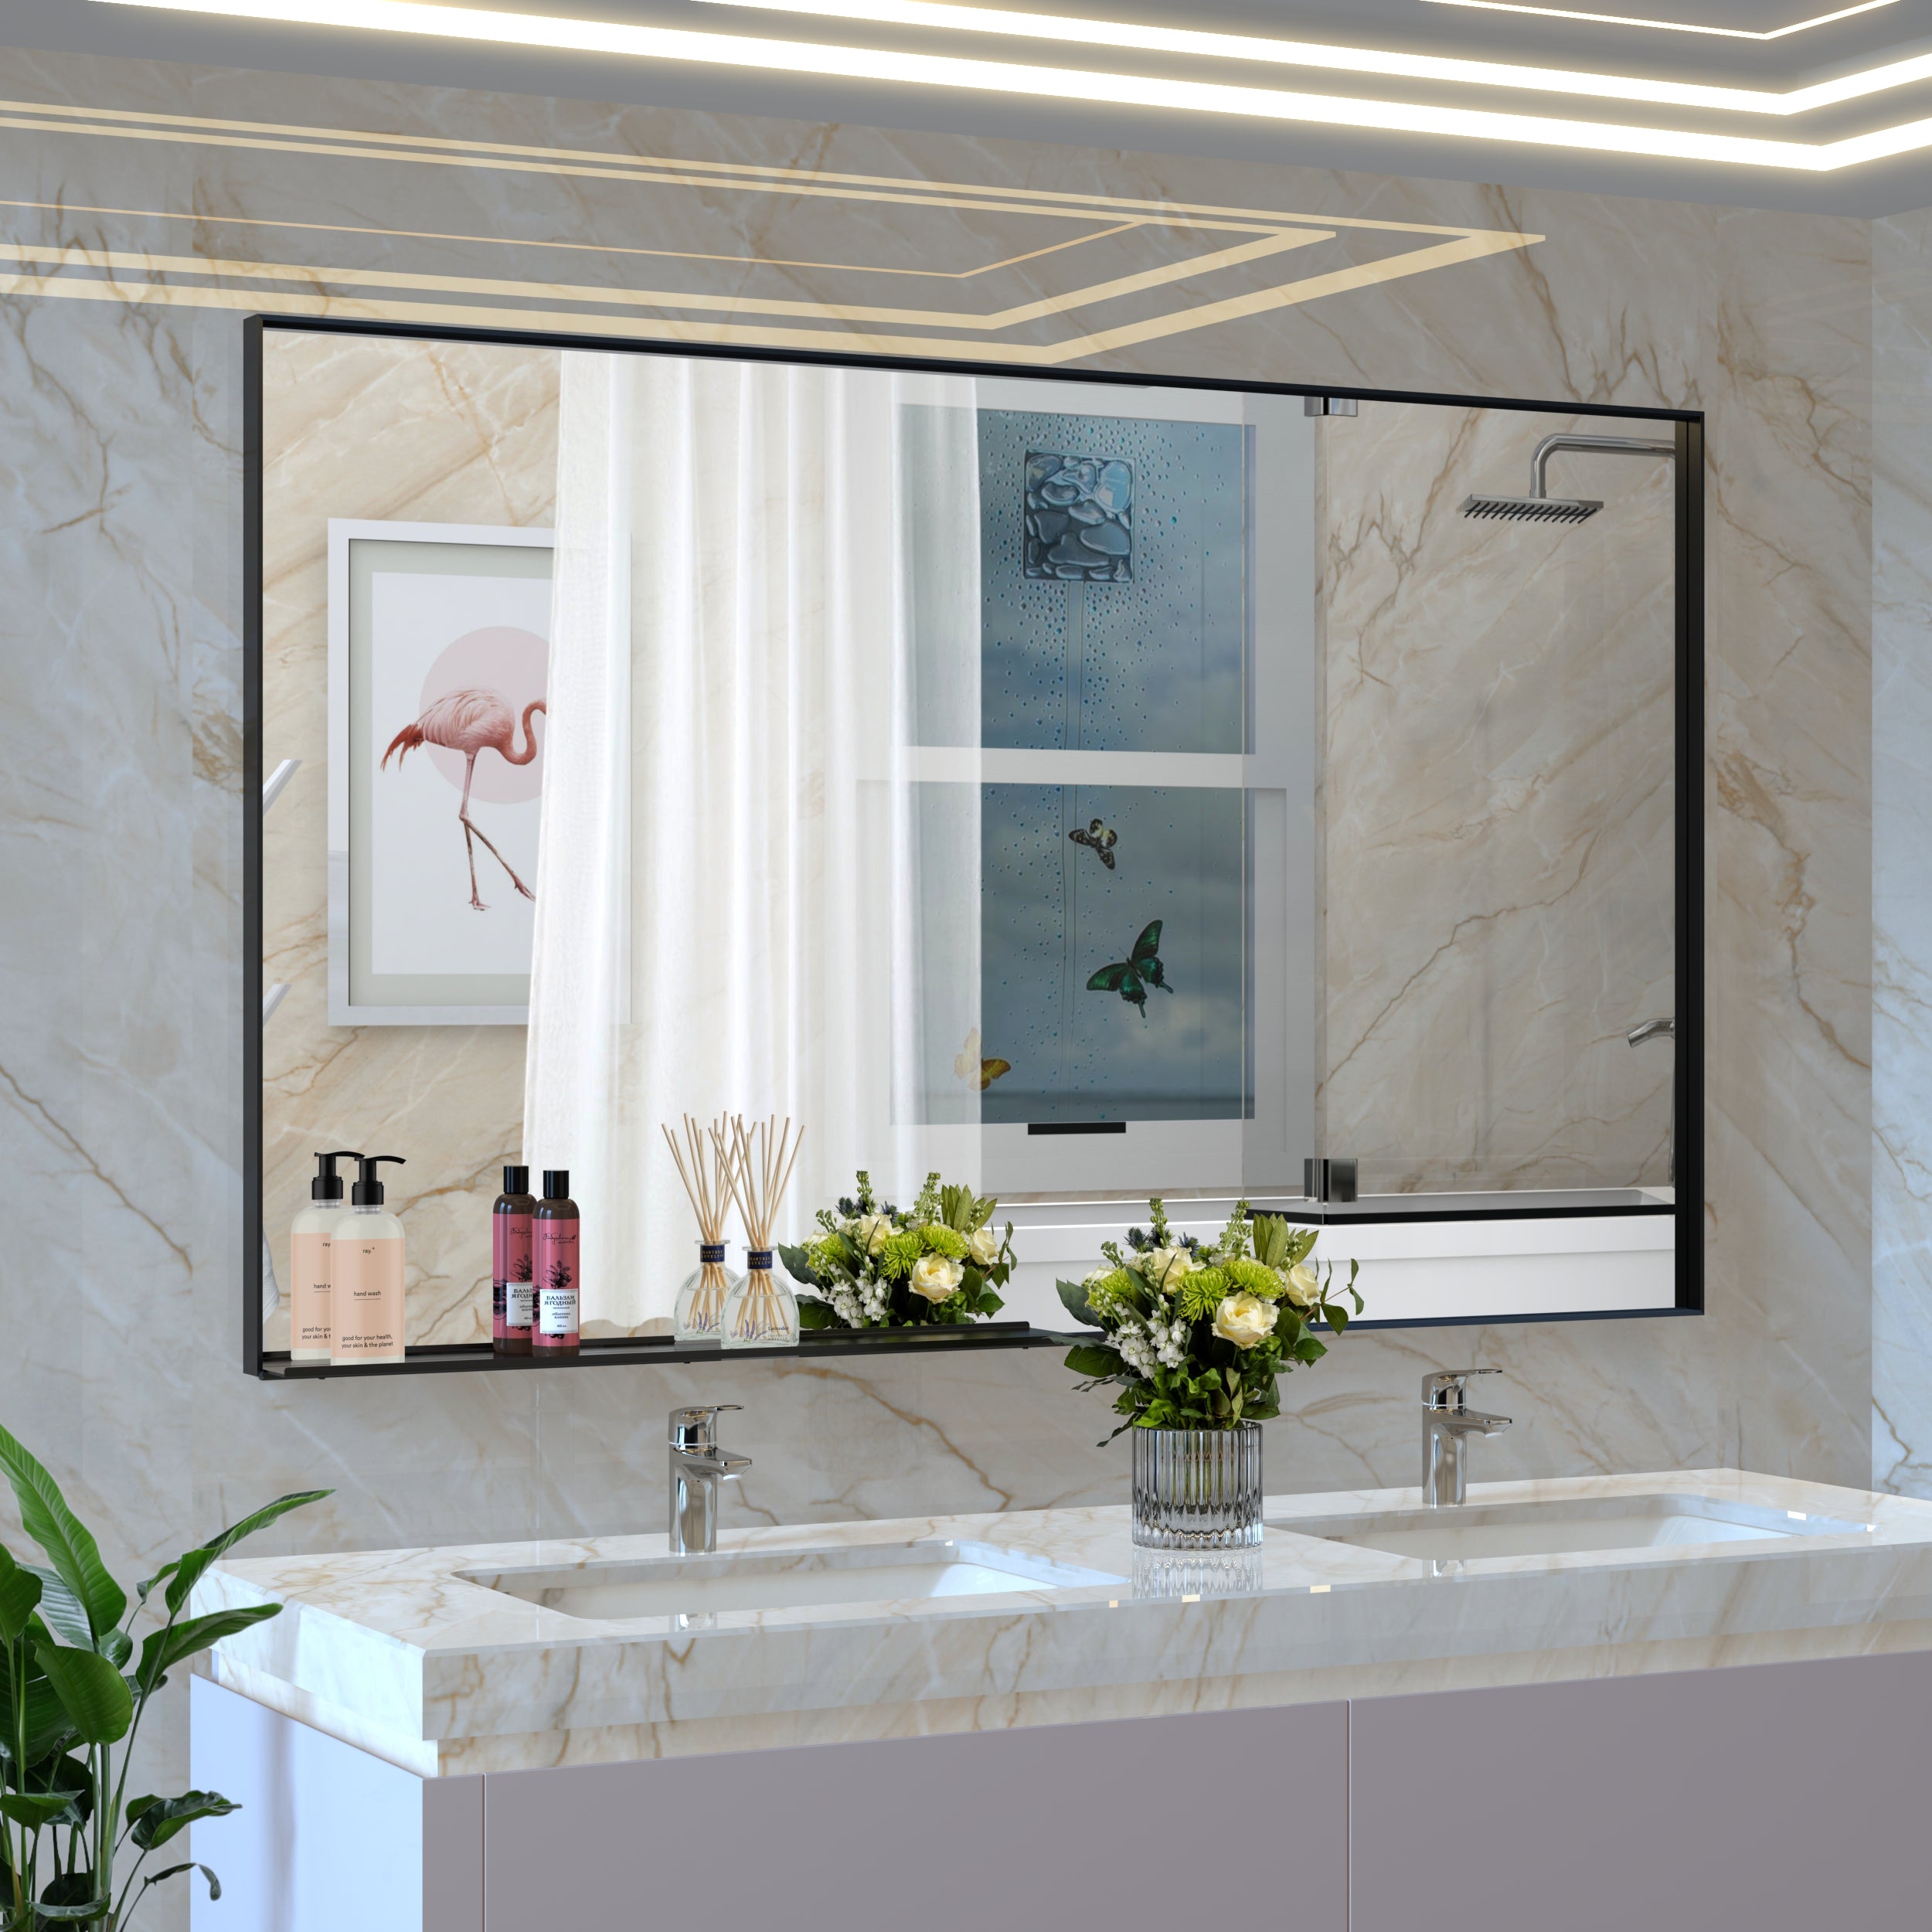 60"x40" Oversized Modern Rectangle Bathroom Mirror with Black Frame Decorative Large Wall Mirrors for Bathroom Living Room Bedroom Vertical or Horizontal Wall Mounted mirror with Aluminum Frame